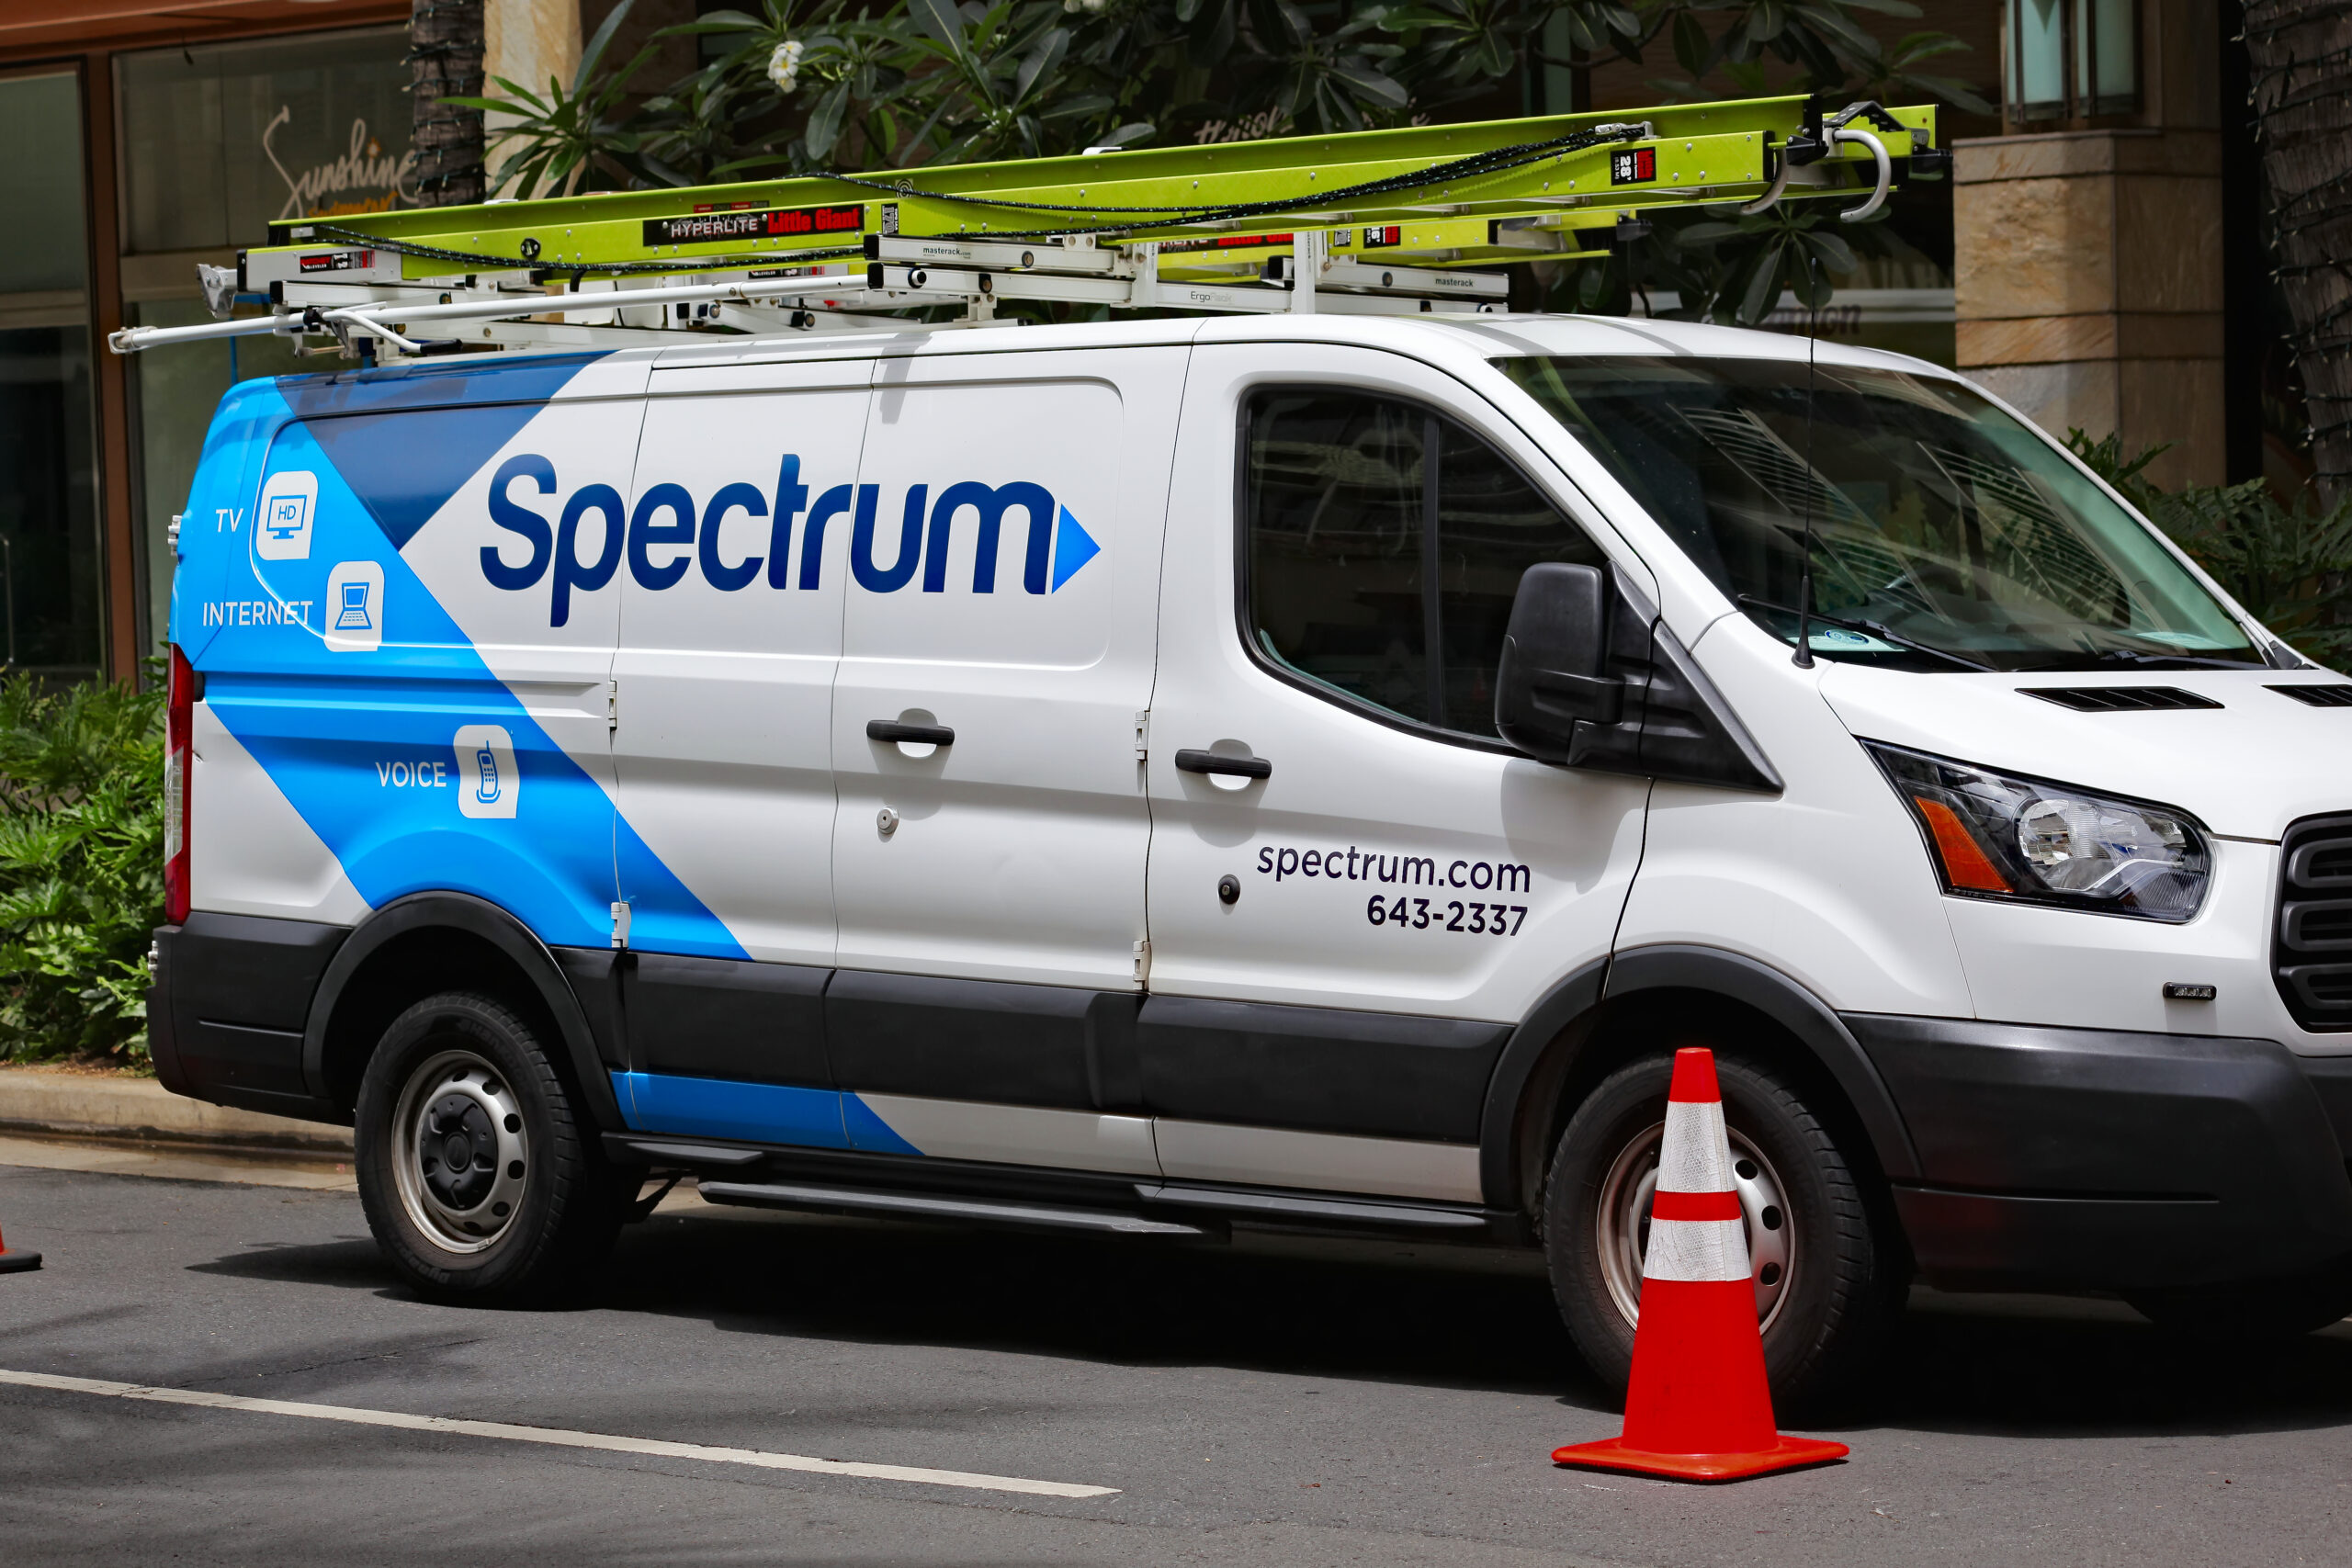 Spectrum Cable TV is Reportedly Buying a Small Cable TV Company For $5 Million